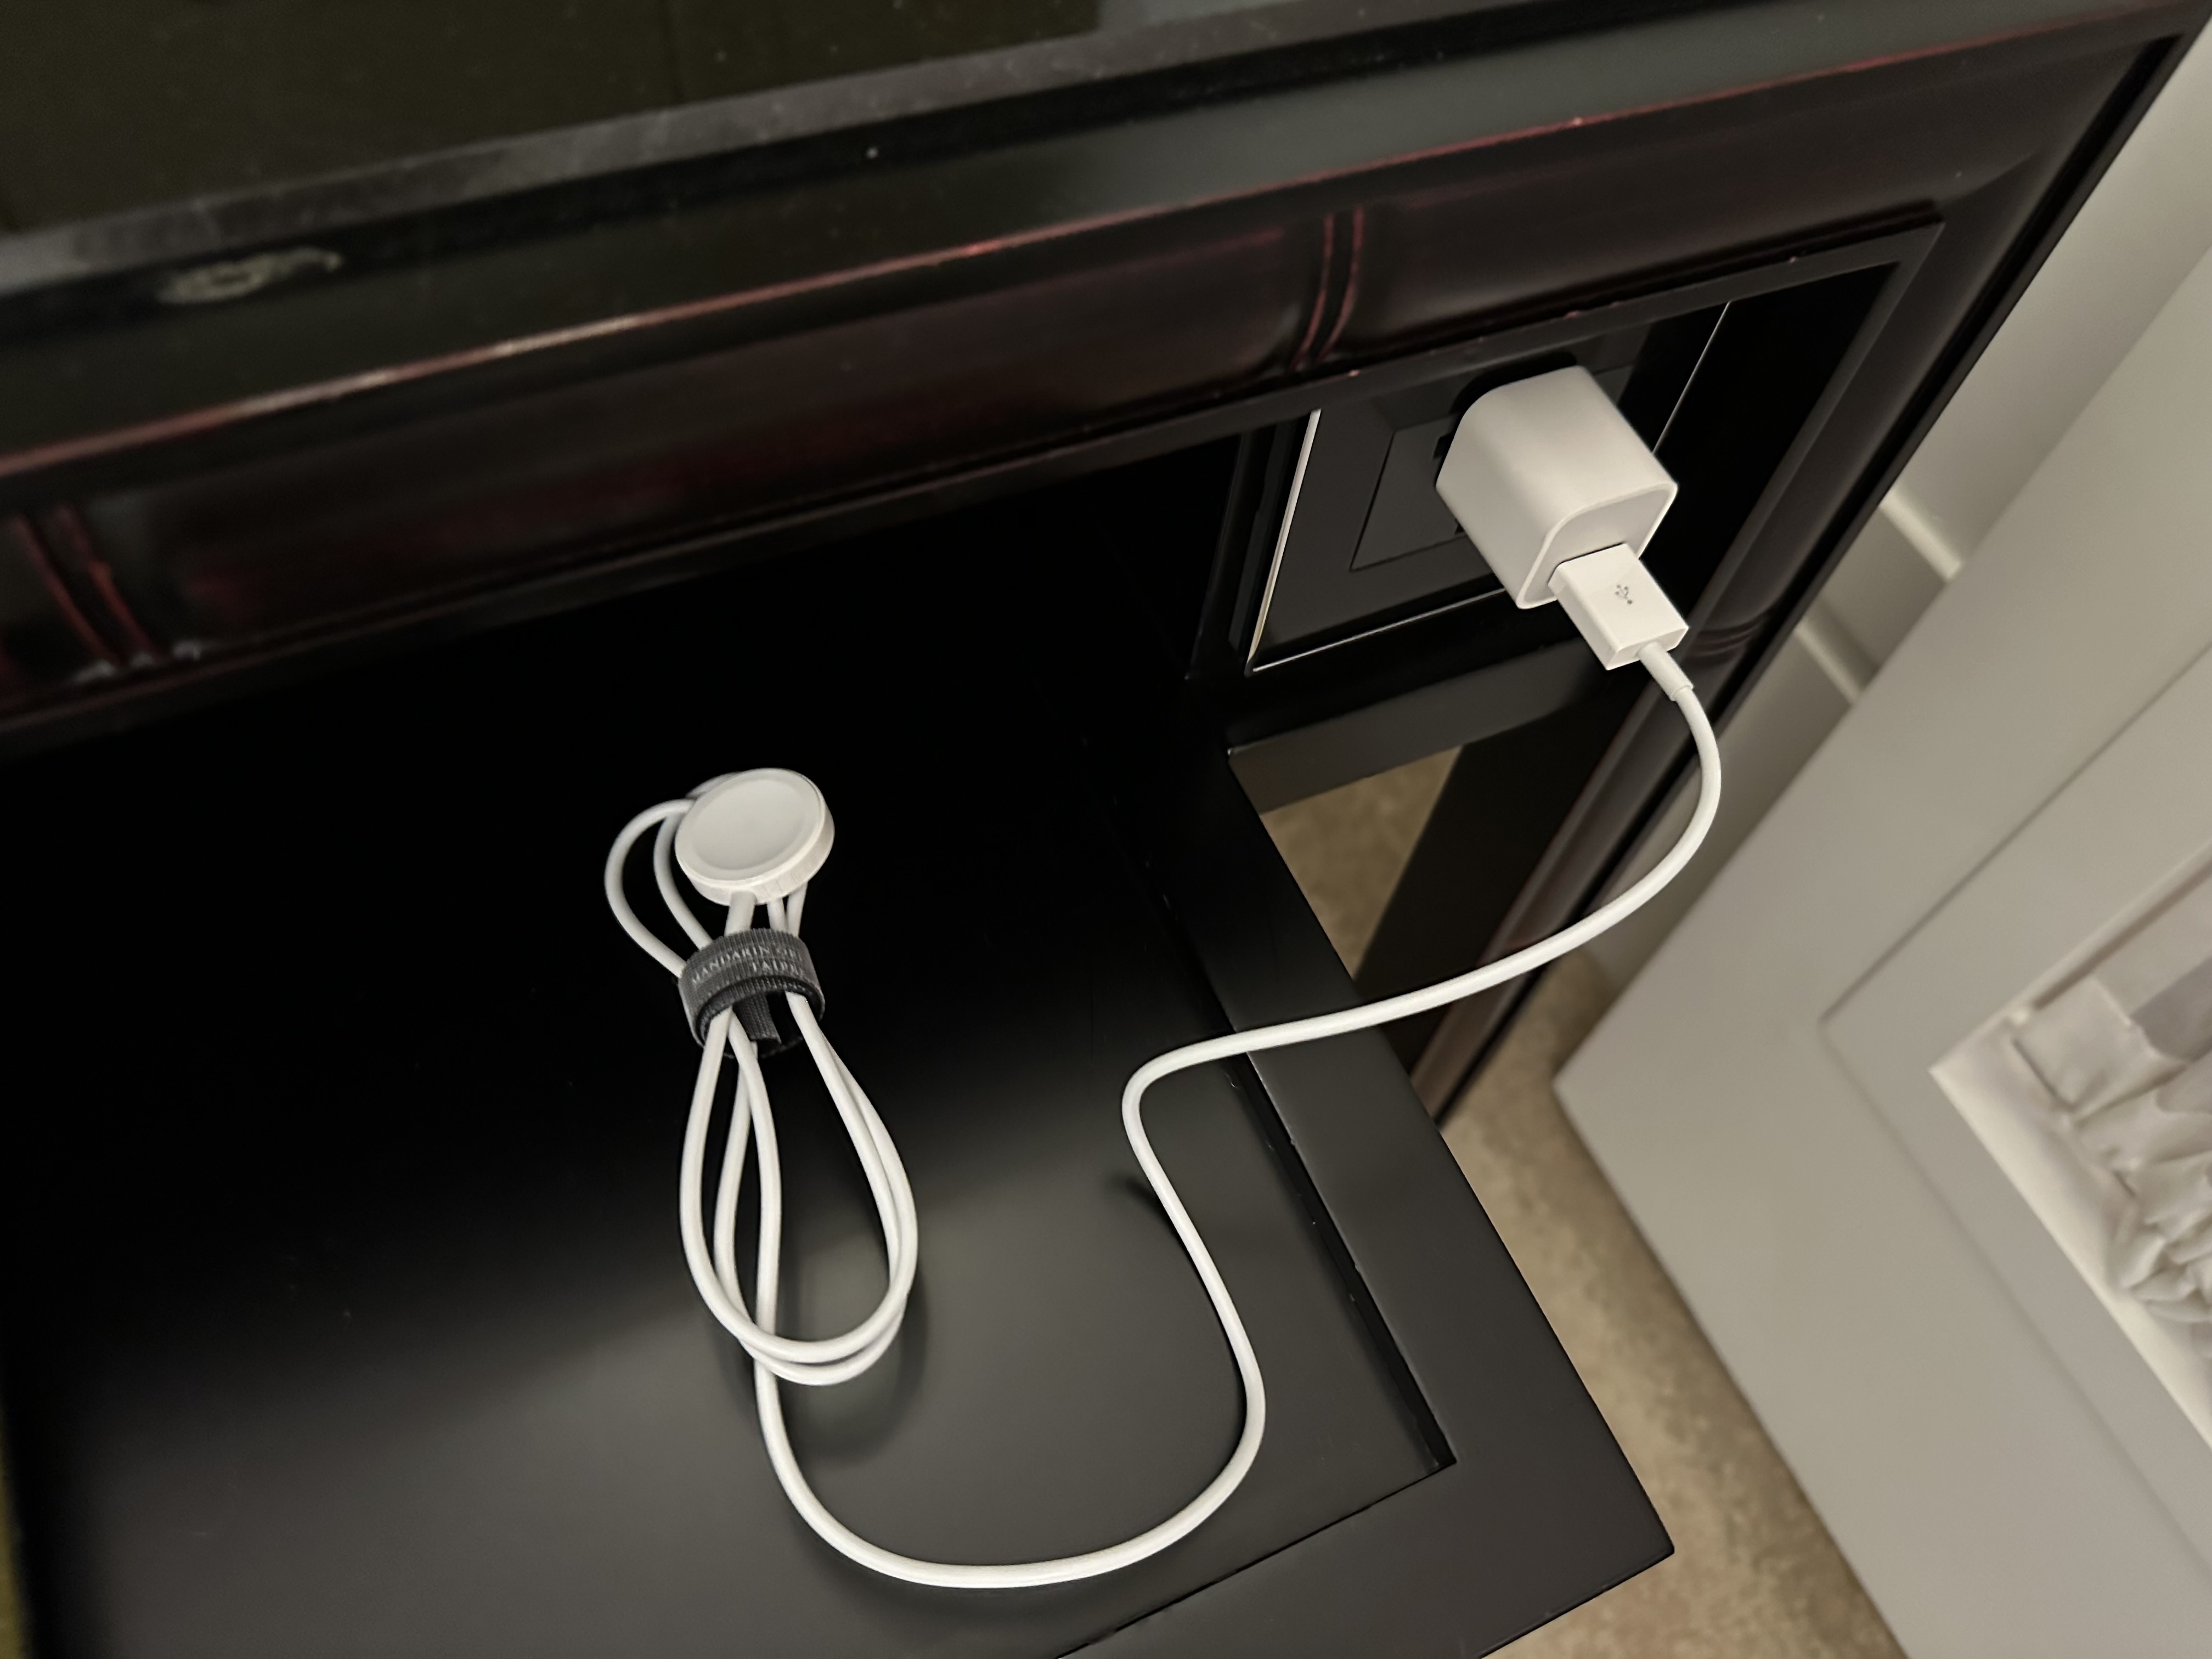 a white cord plugged into a black table